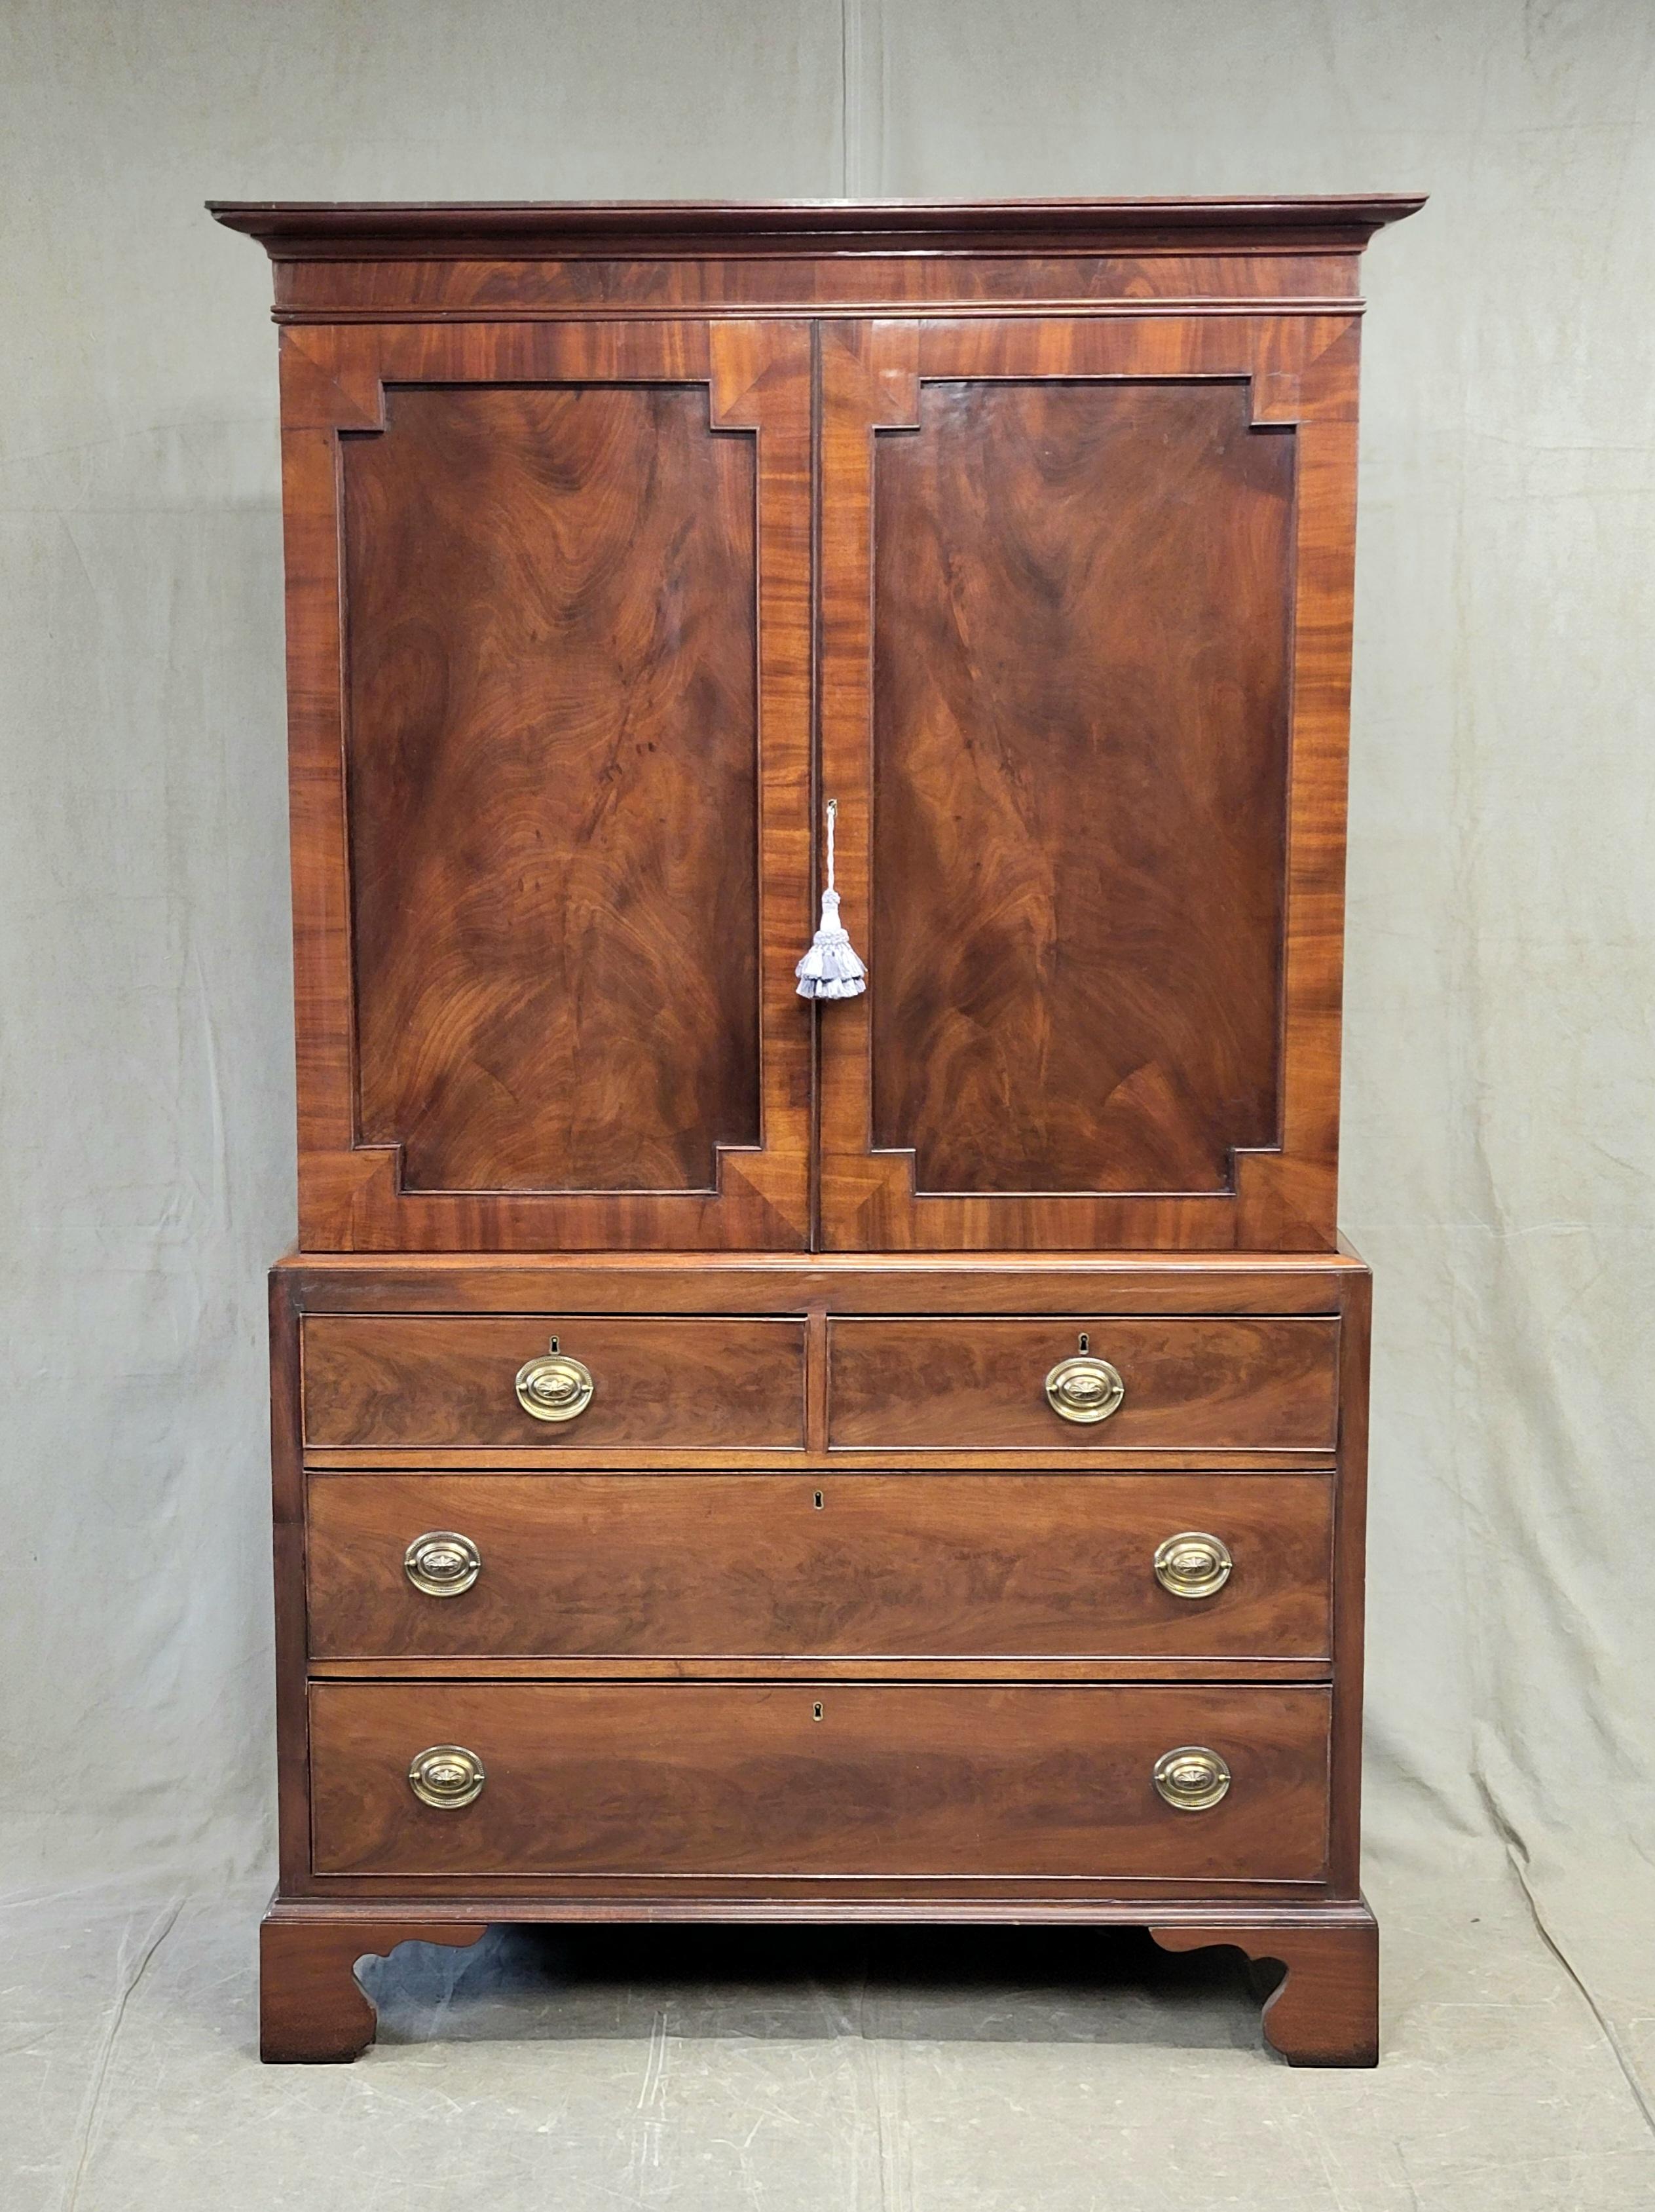 An absolutely gorgeous antique English flame mahogany linen press with oval brass pulls sits a top stunning bracket feet. Crafted in the late 1800s primarily out of solid and mahogany veneers with the exception being pine comprising the drawer